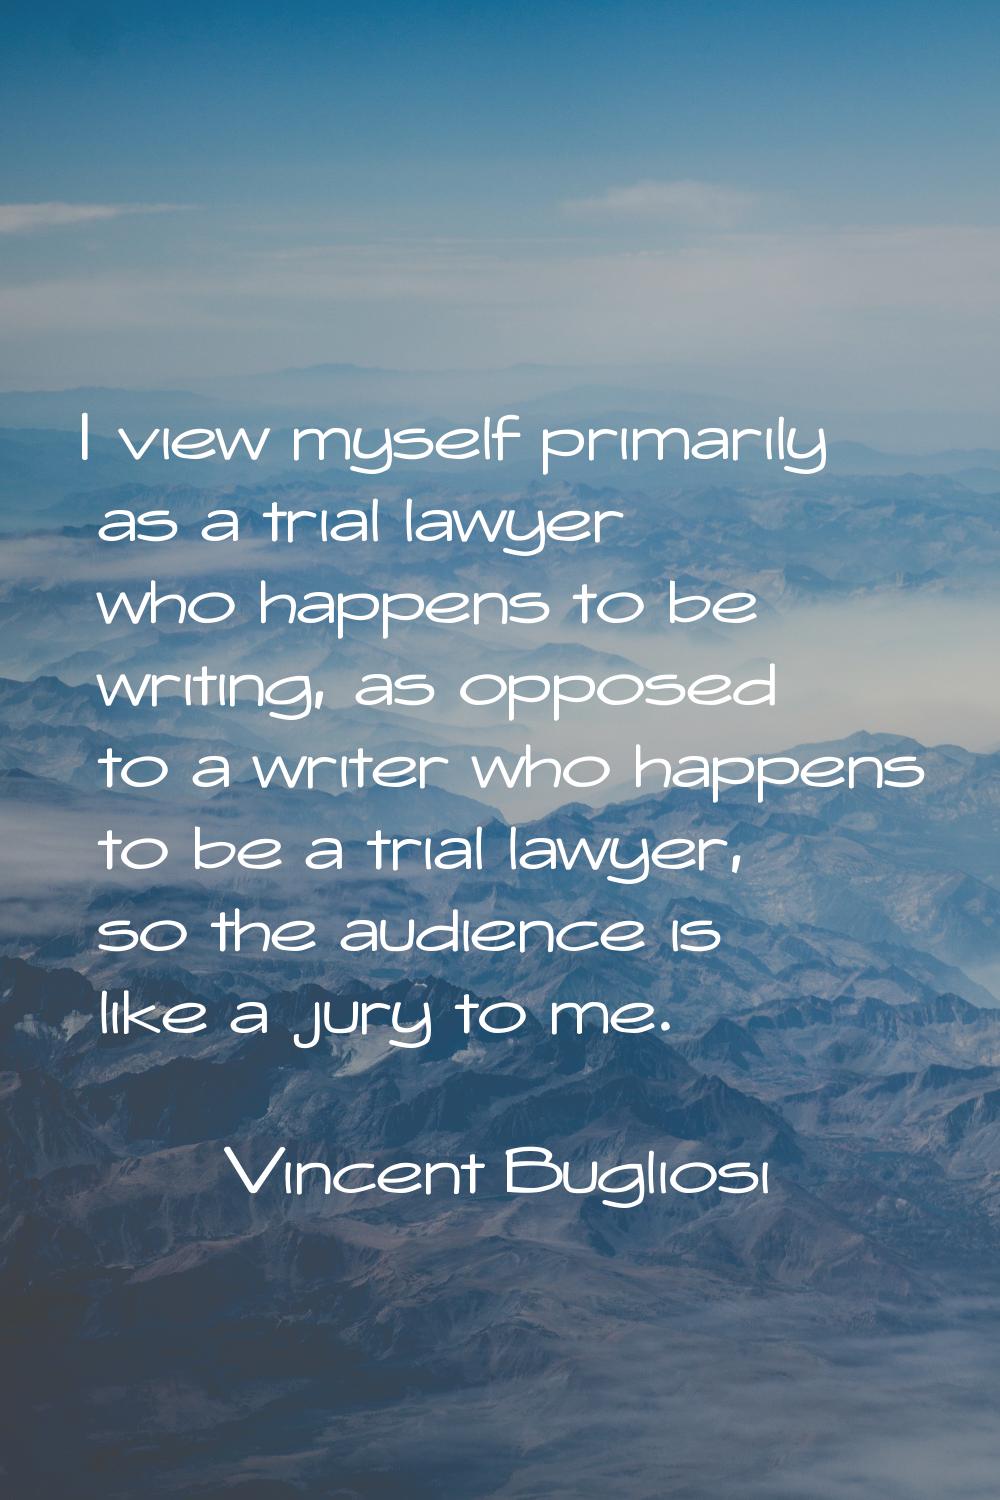 I view myself primarily as a trial lawyer who happens to be writing, as opposed to a writer who hap